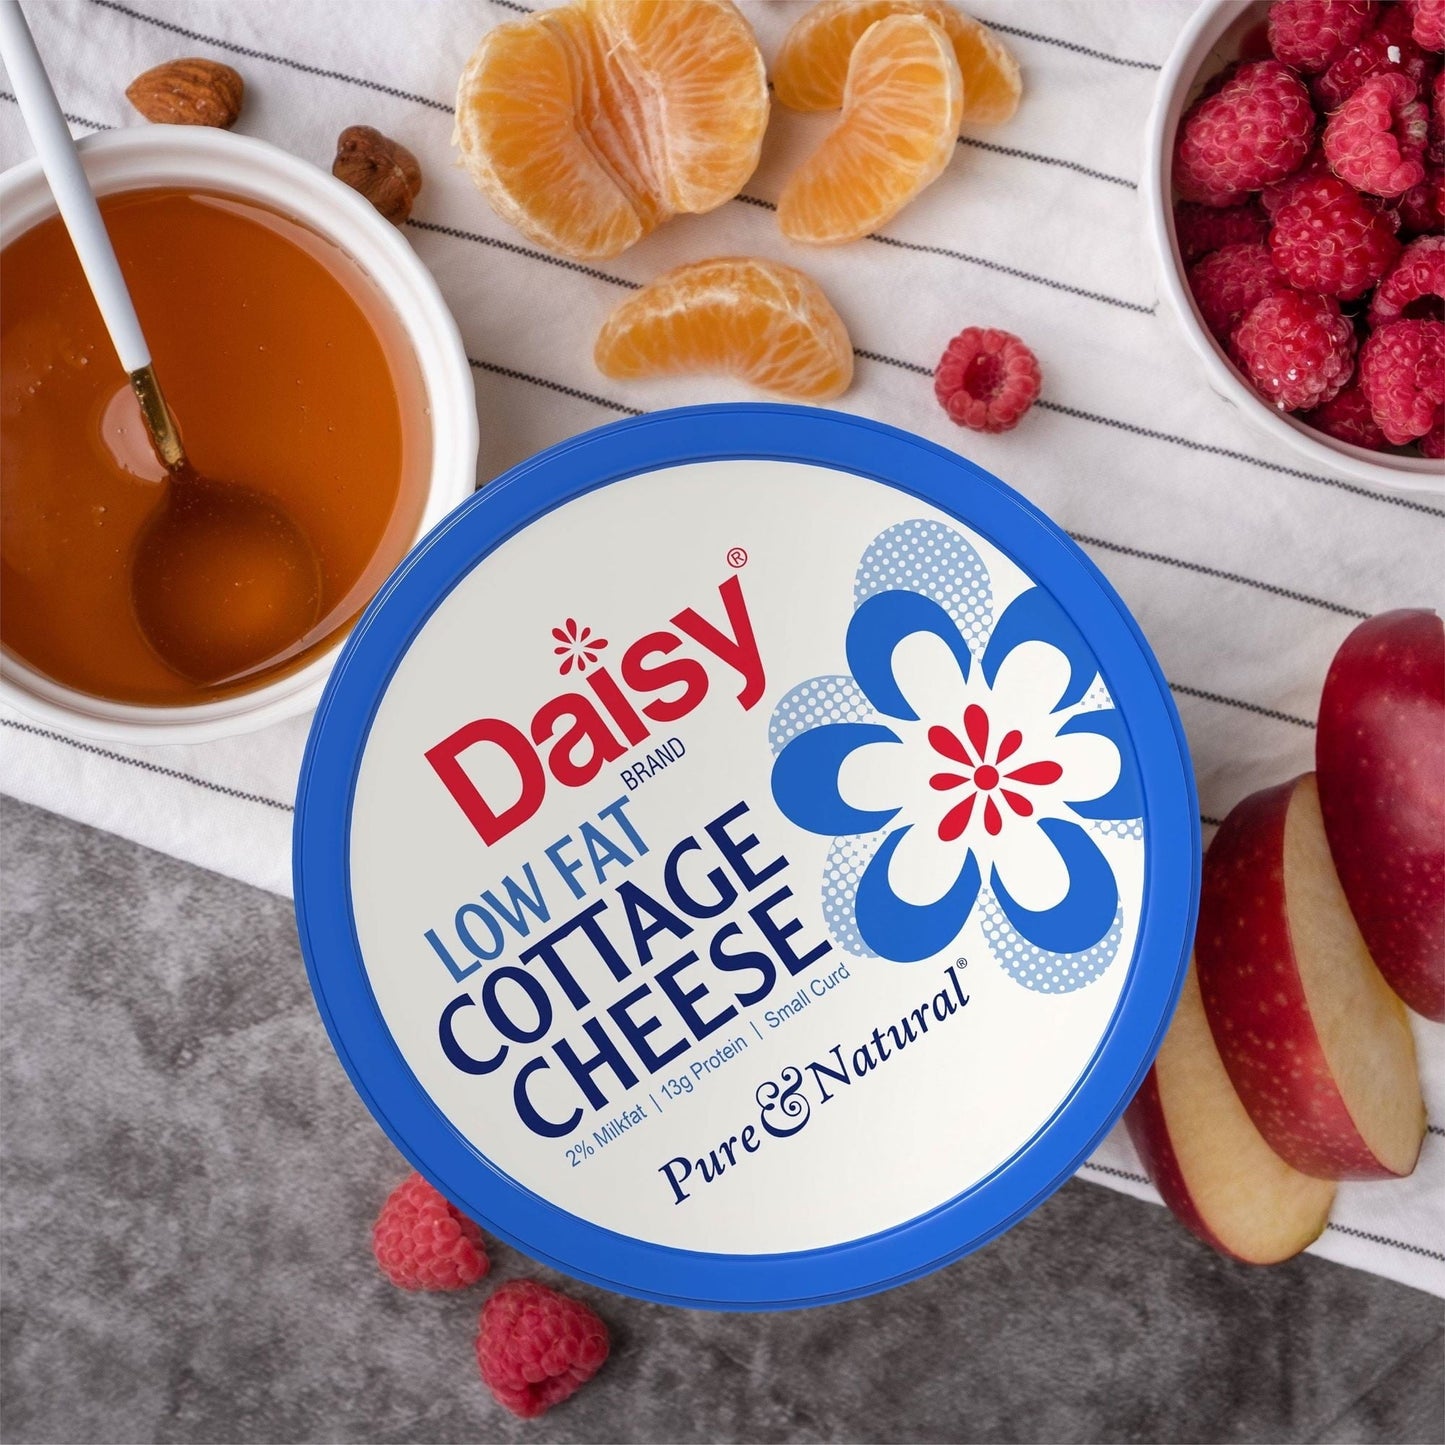 Daisy Pure and Natural Low Fat Cottage Cheese, 2% Milkfat, 24 oz (1.5 lb) Tub (Refrigerated) - 13g of Protein per serving